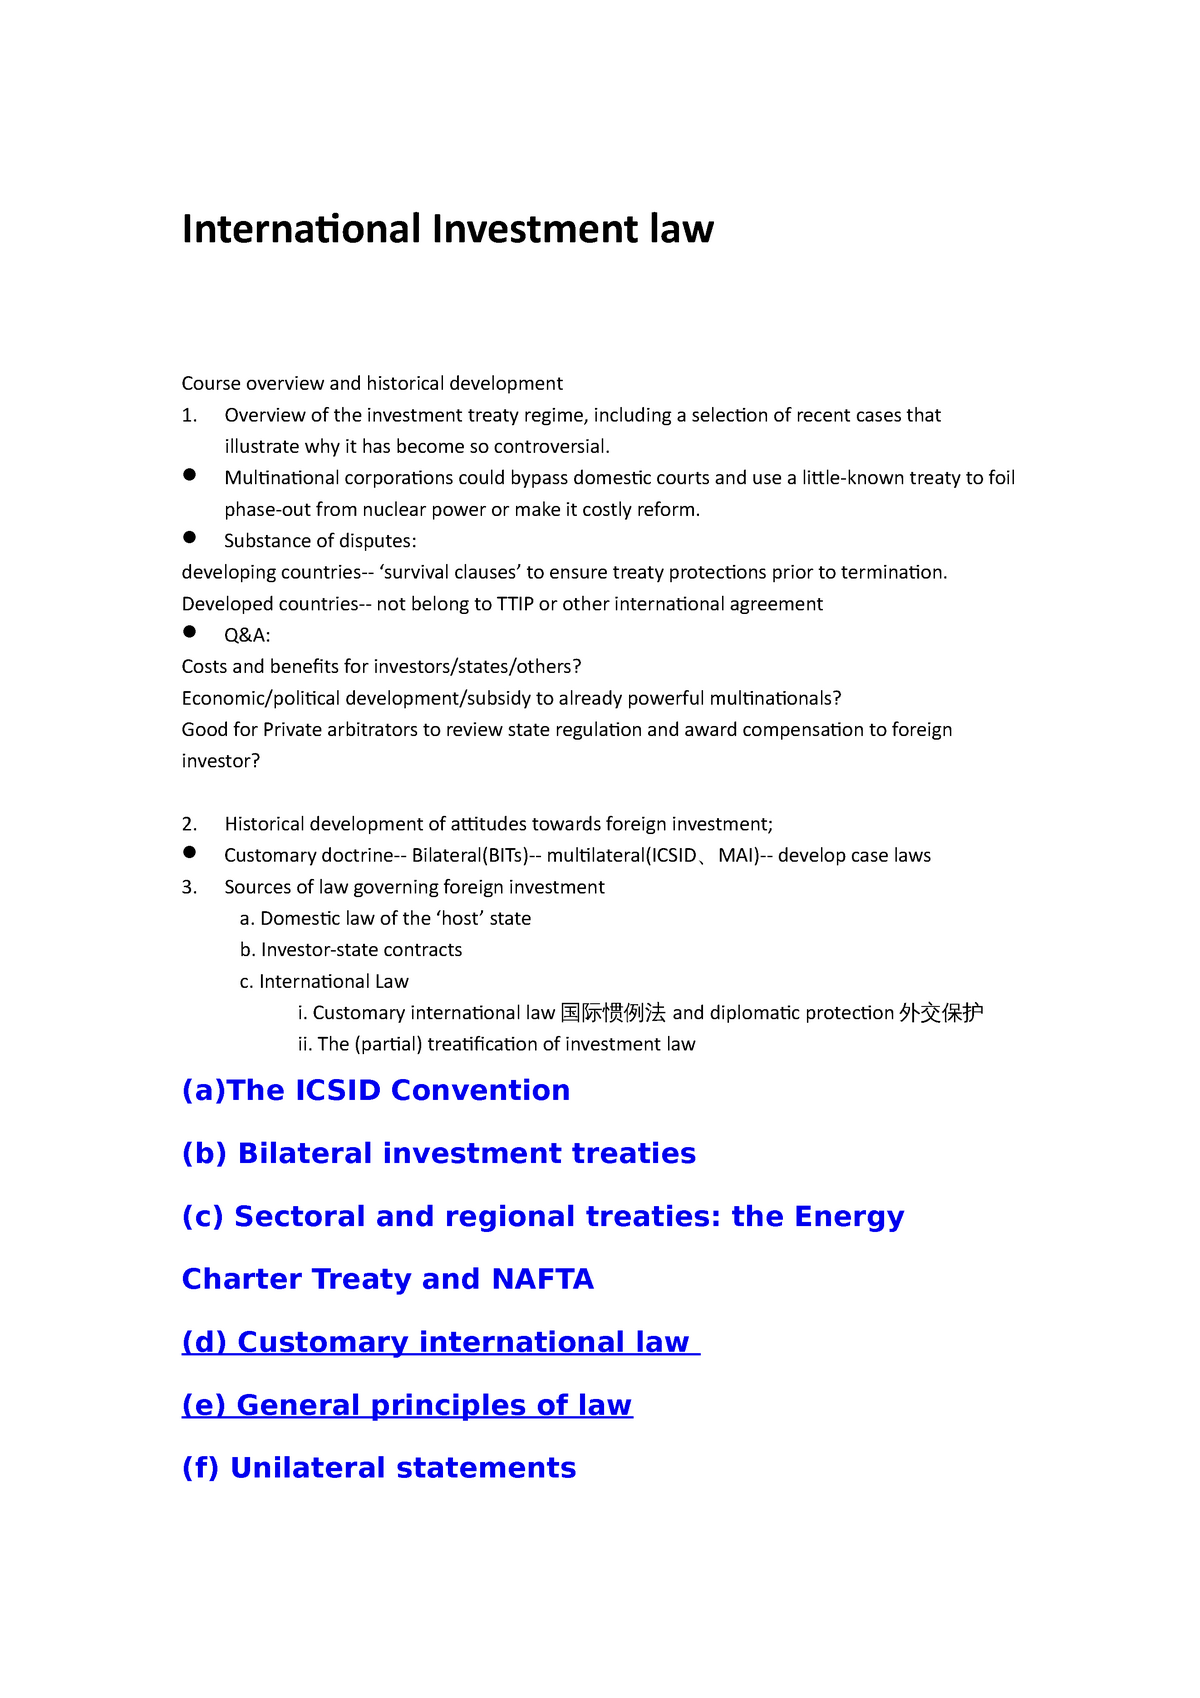 international investment law research paper